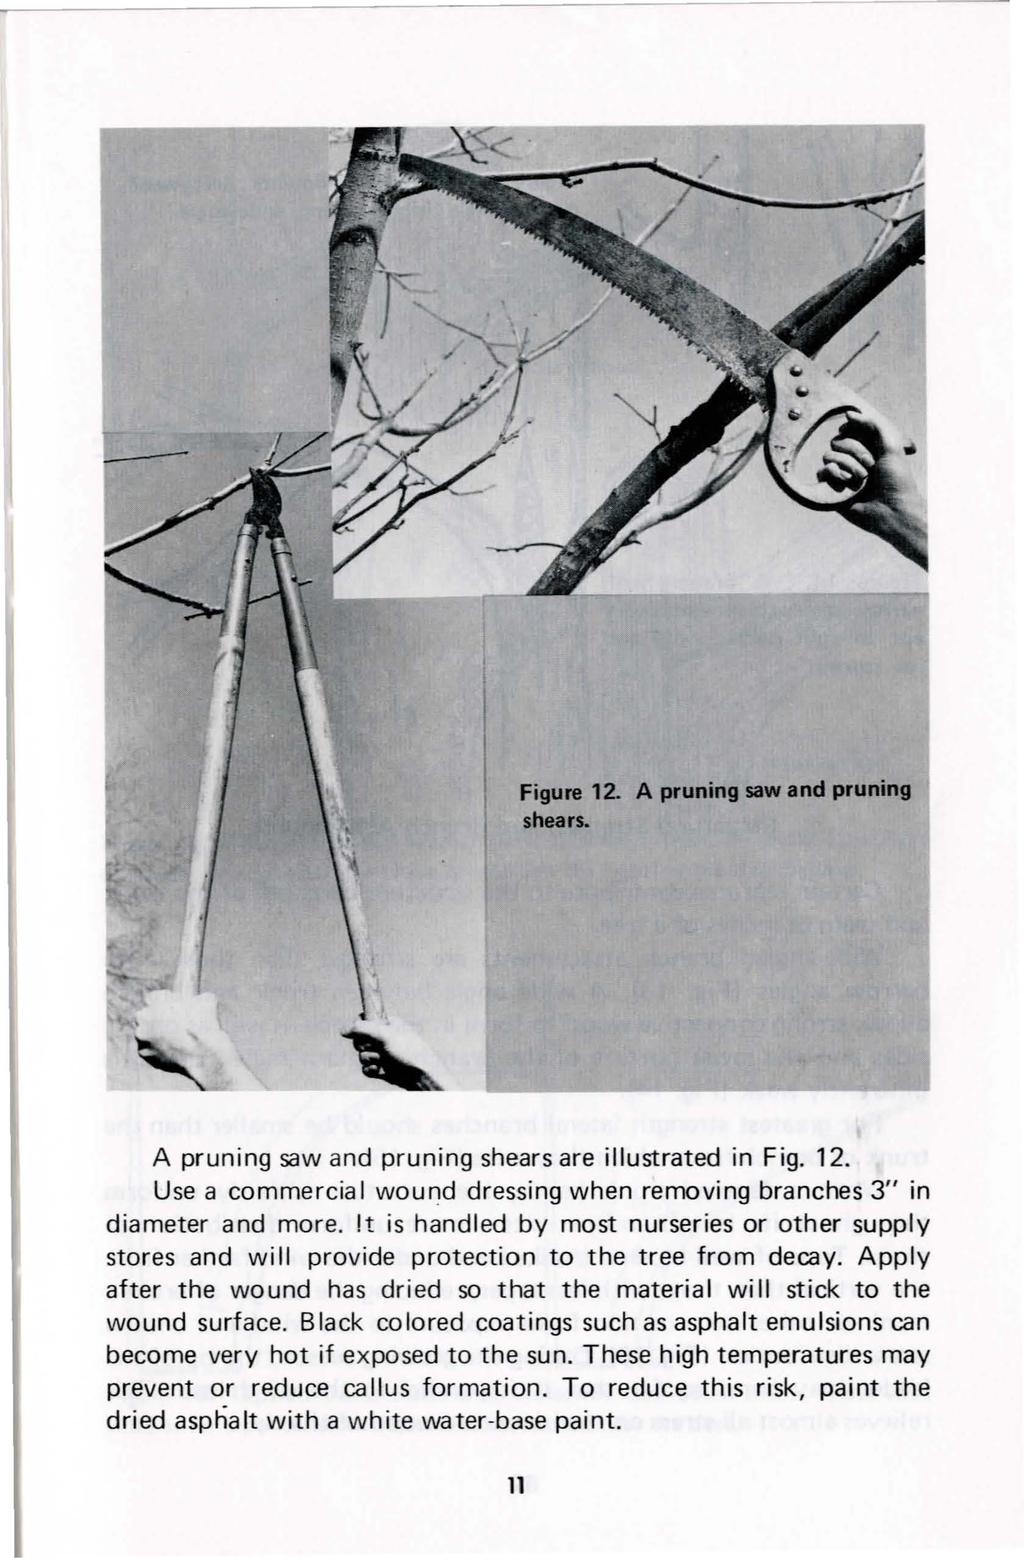 Figure 12.. A pruning saw and pruning shears. A pruning saw and pruning shears are illustrated in Fig. 12. Use a commercial wound dressing when removing branches 3" in diameter and more.